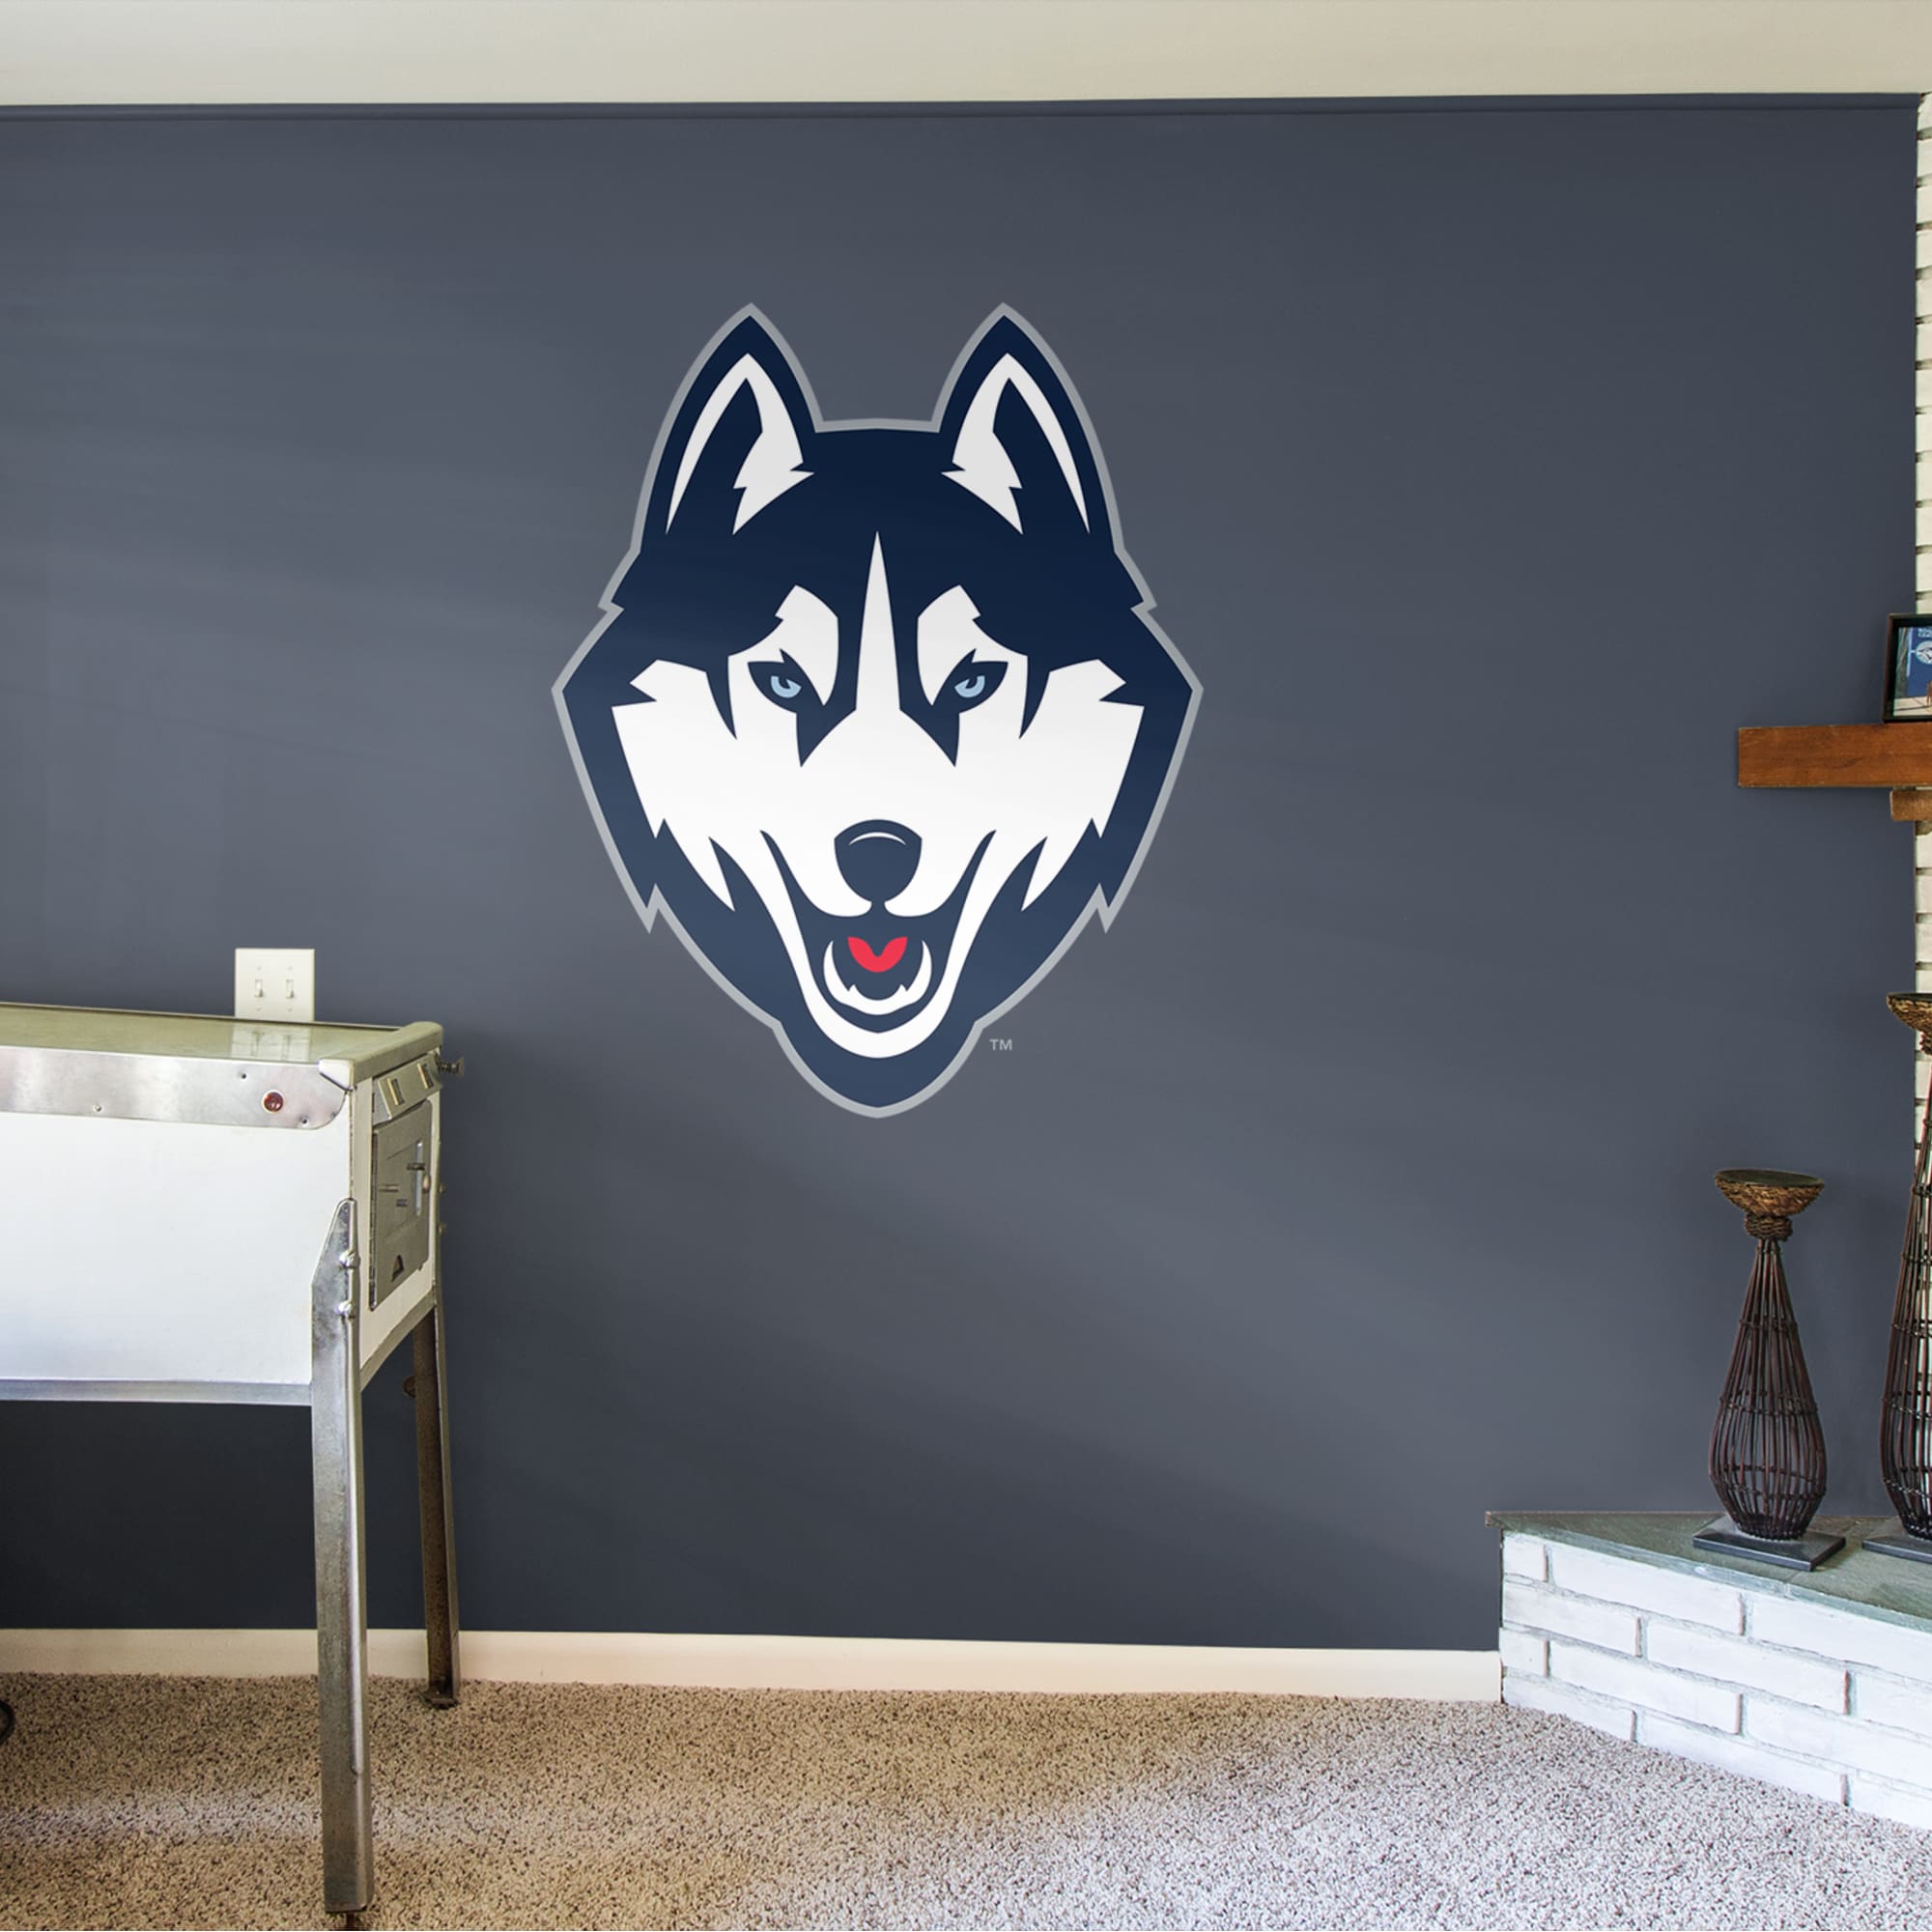 UConn Huskies: Logo - Officially Licensed Removable Wall Decal 40.0"W x 50.0"H by Fathead | Vinyl